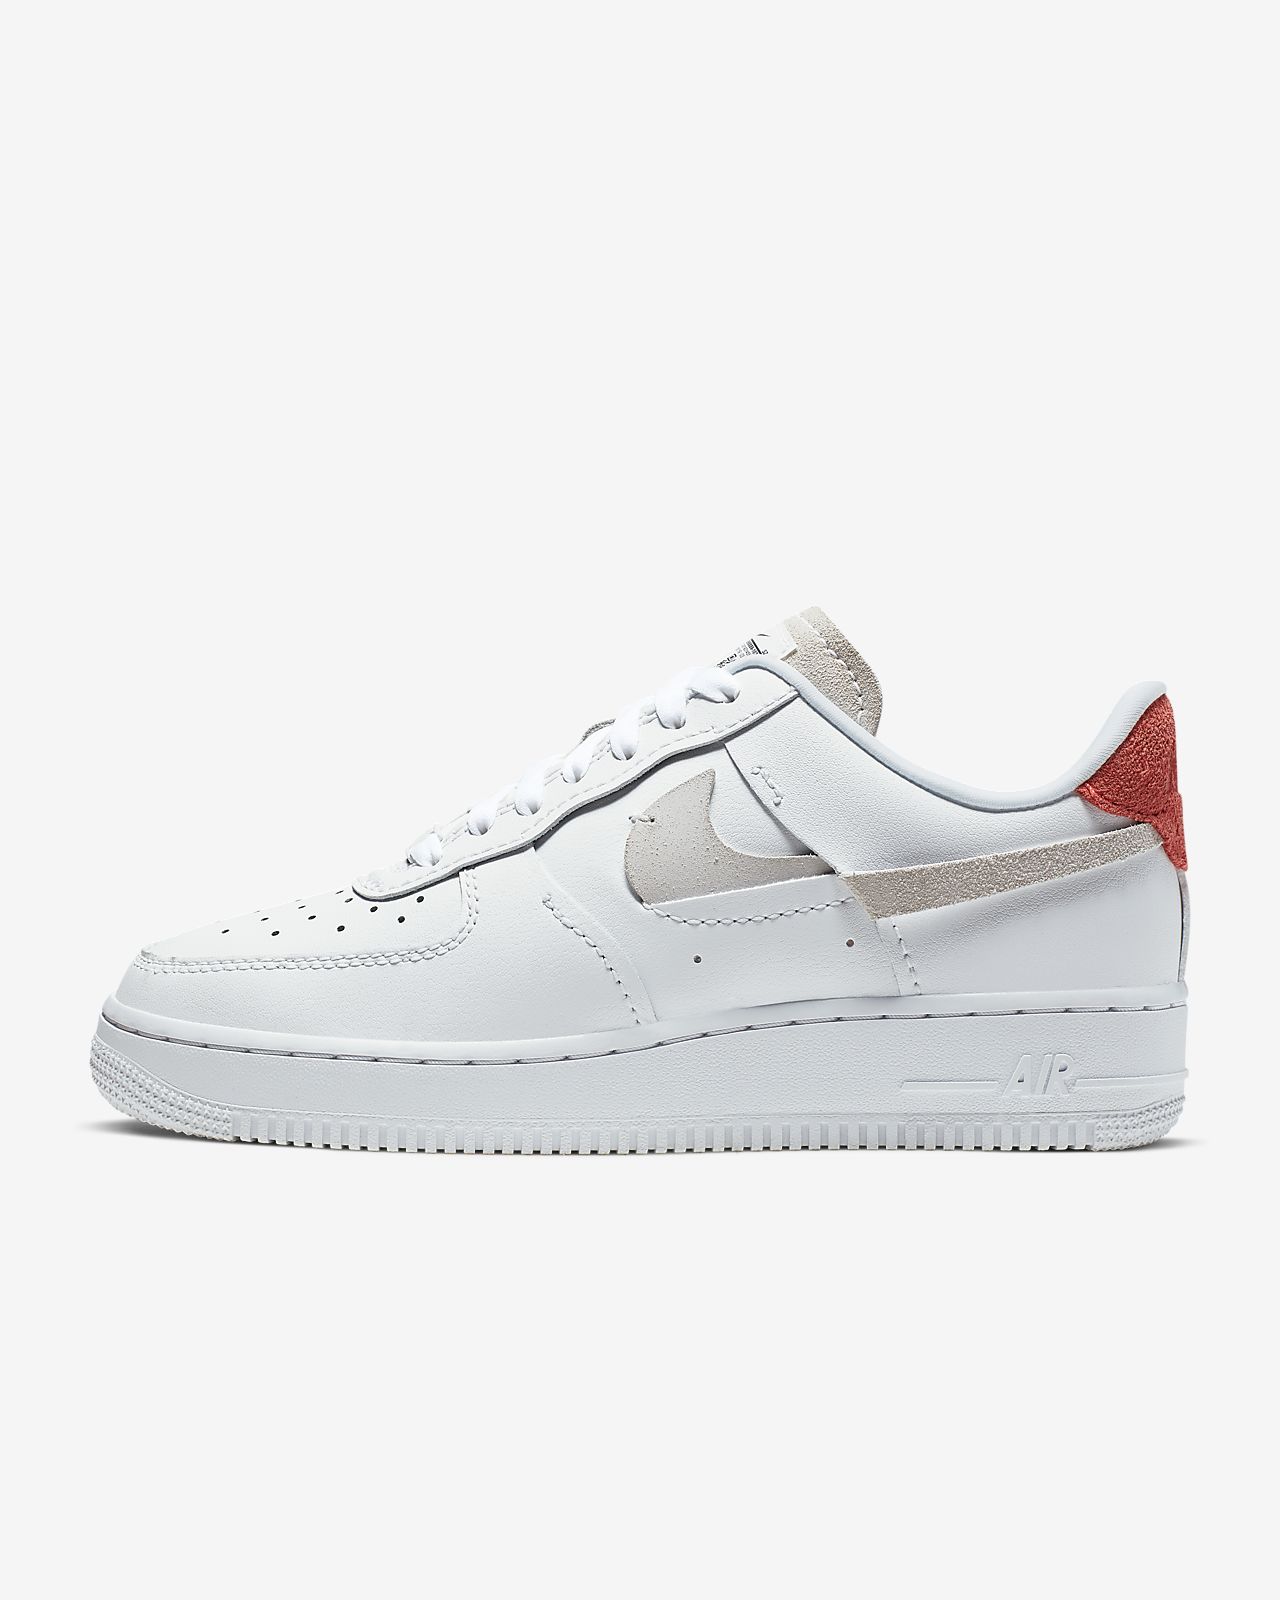 nike air force 1 07 low lux